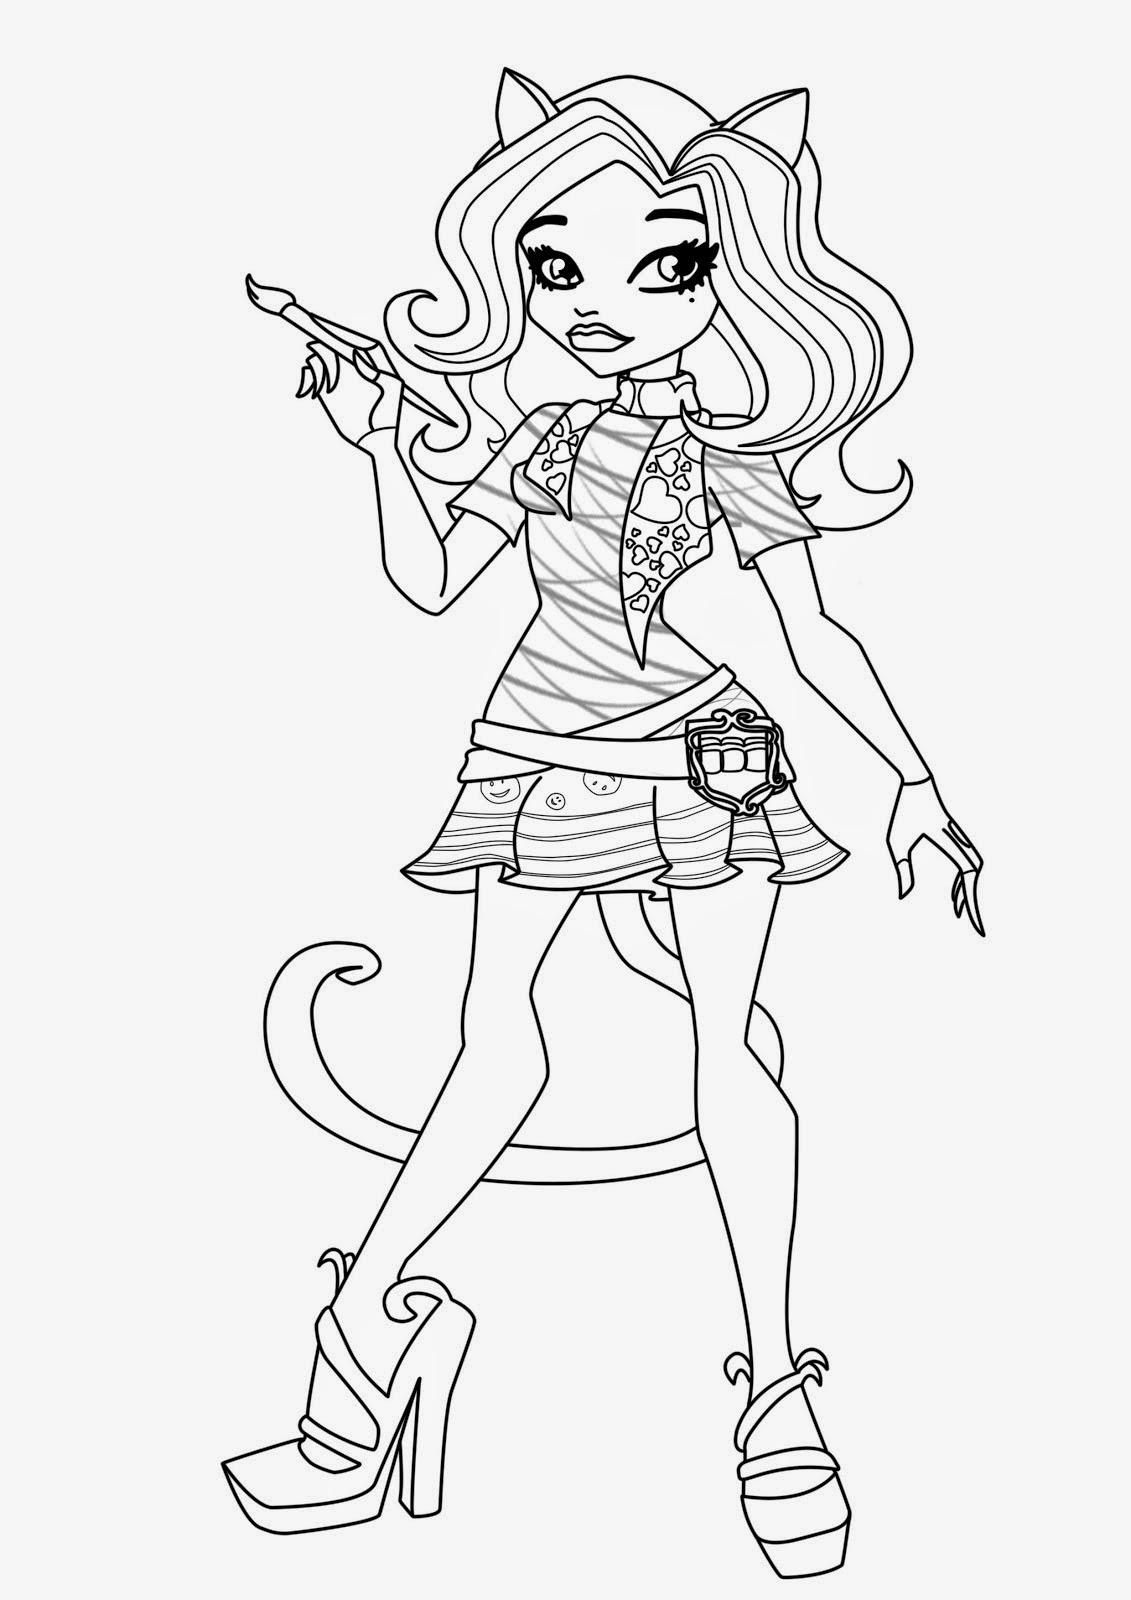 free monster high coloring pages to print free printable monster high coloring pages coloring pages print free pages to coloring monster high 